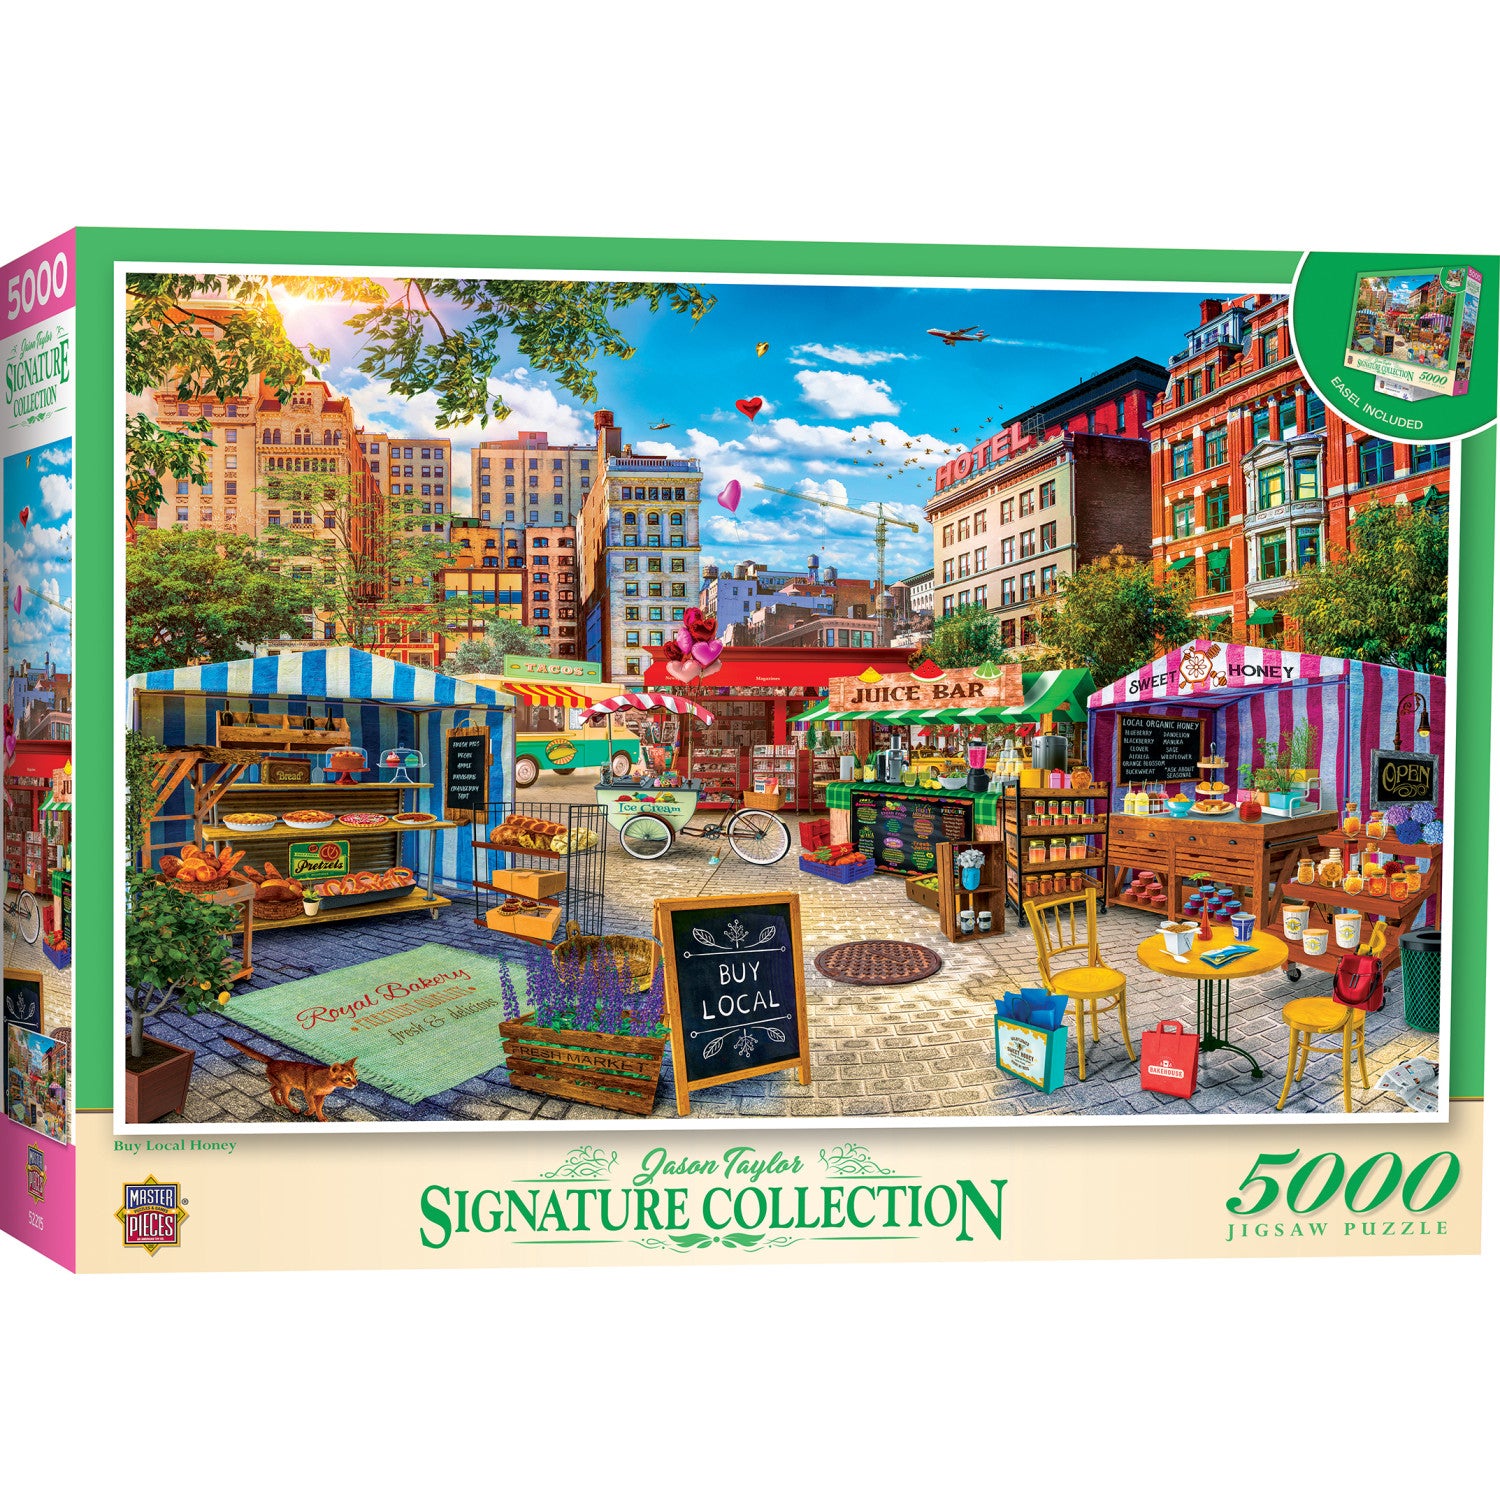 Signature Collection - Buy Local Honey 5000 Piece Puzzle